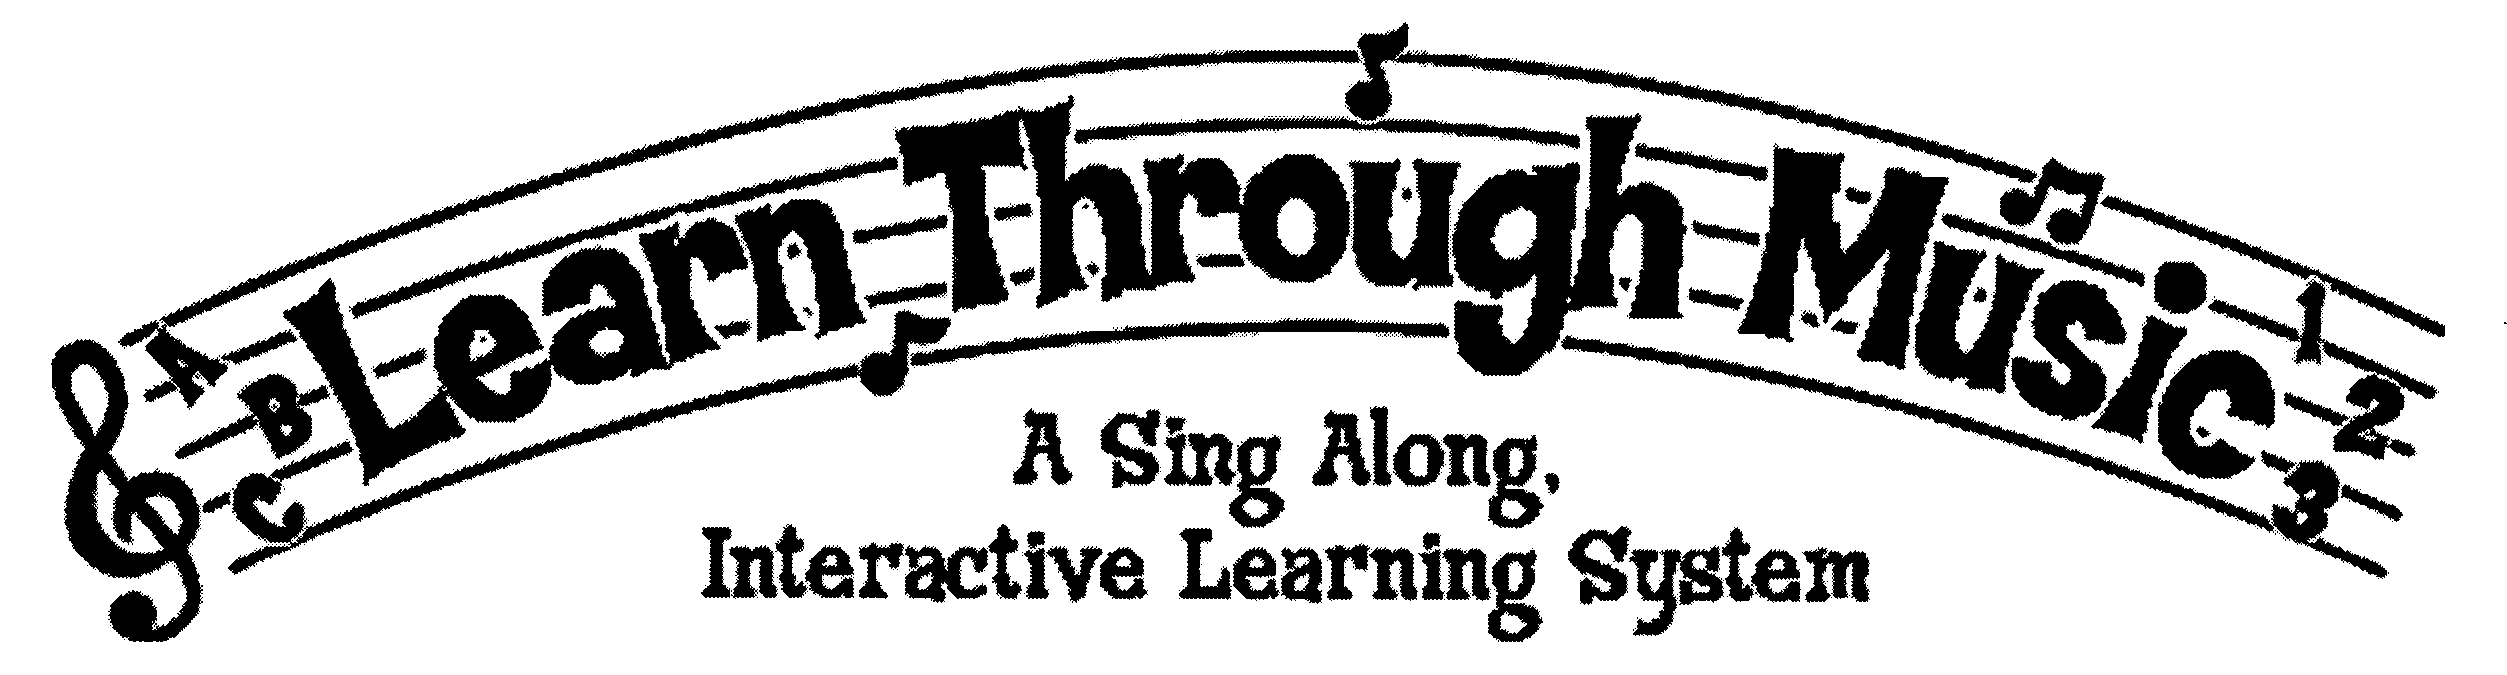  ABC 123 LEARN THROUGH MUSIC A SING ALONG, INTERACTIVE LEARNING SYSTEM